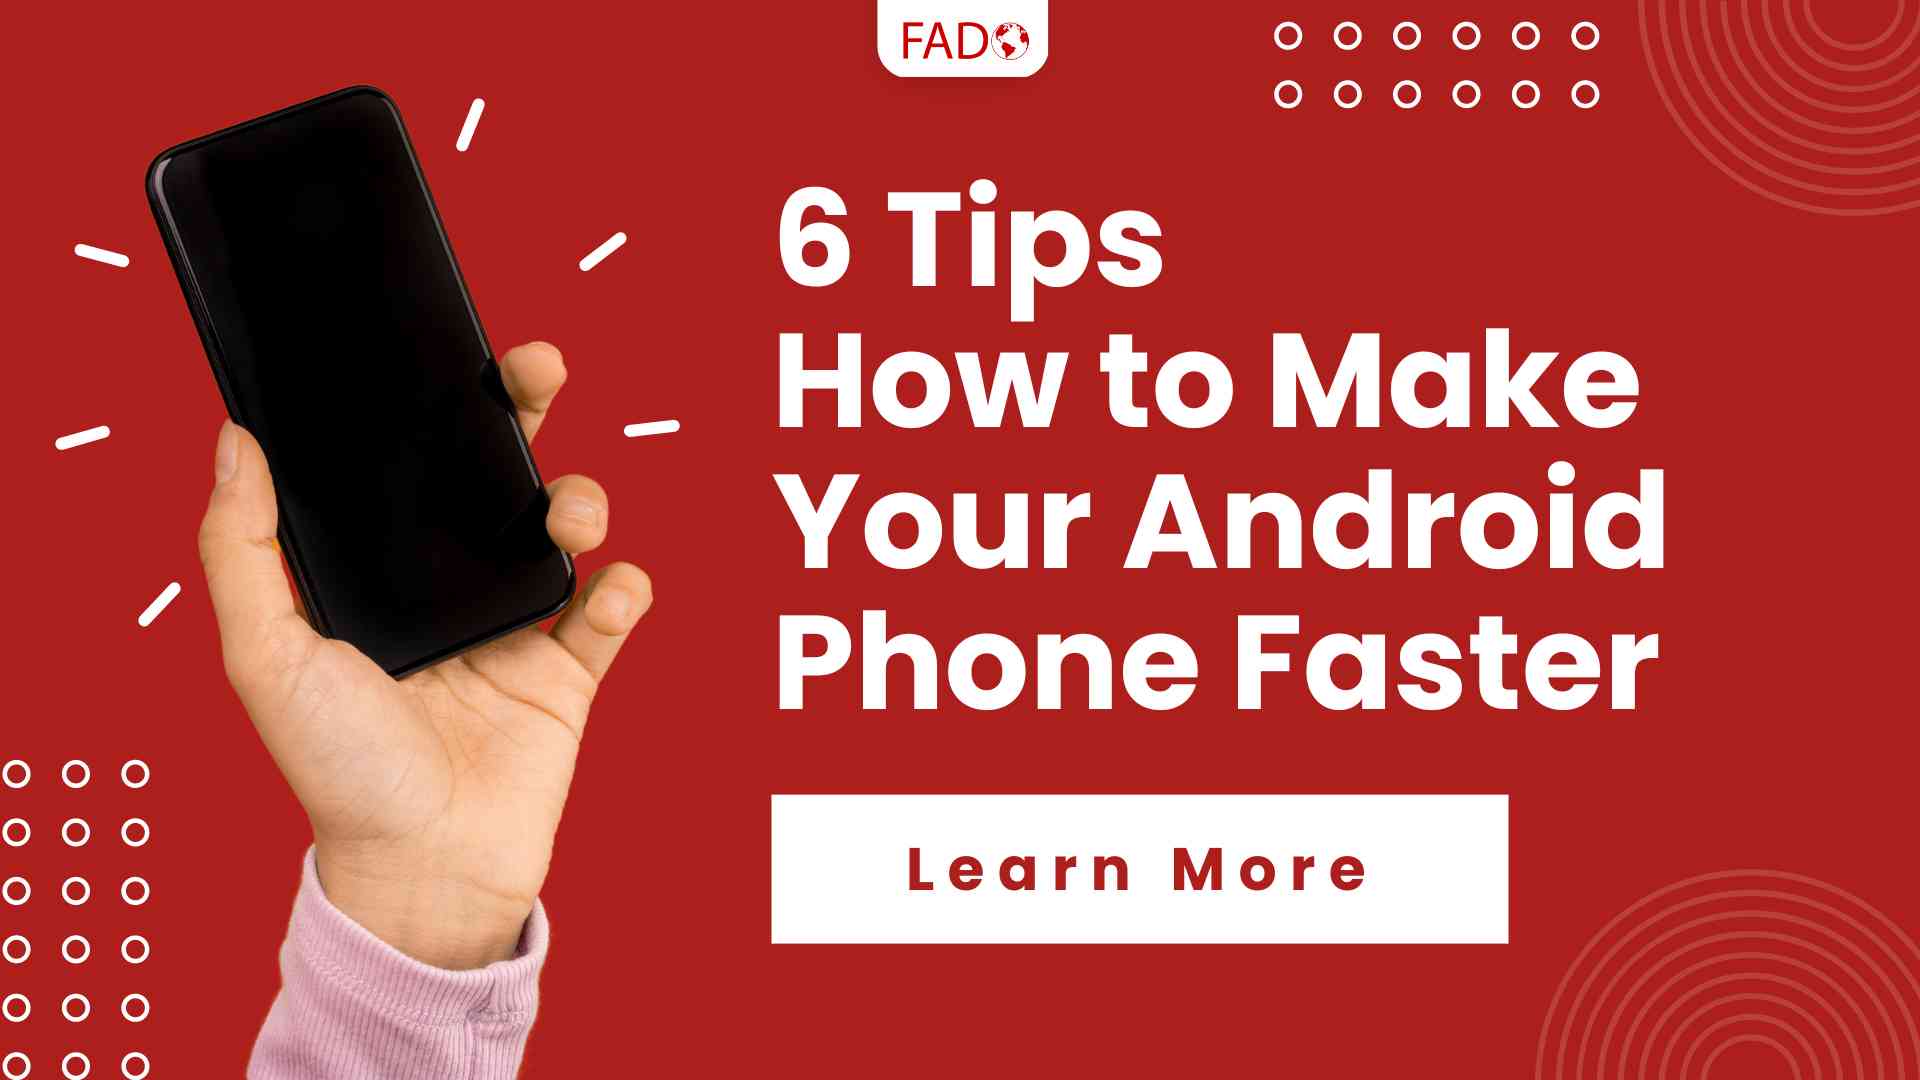 How to make Android phone faster